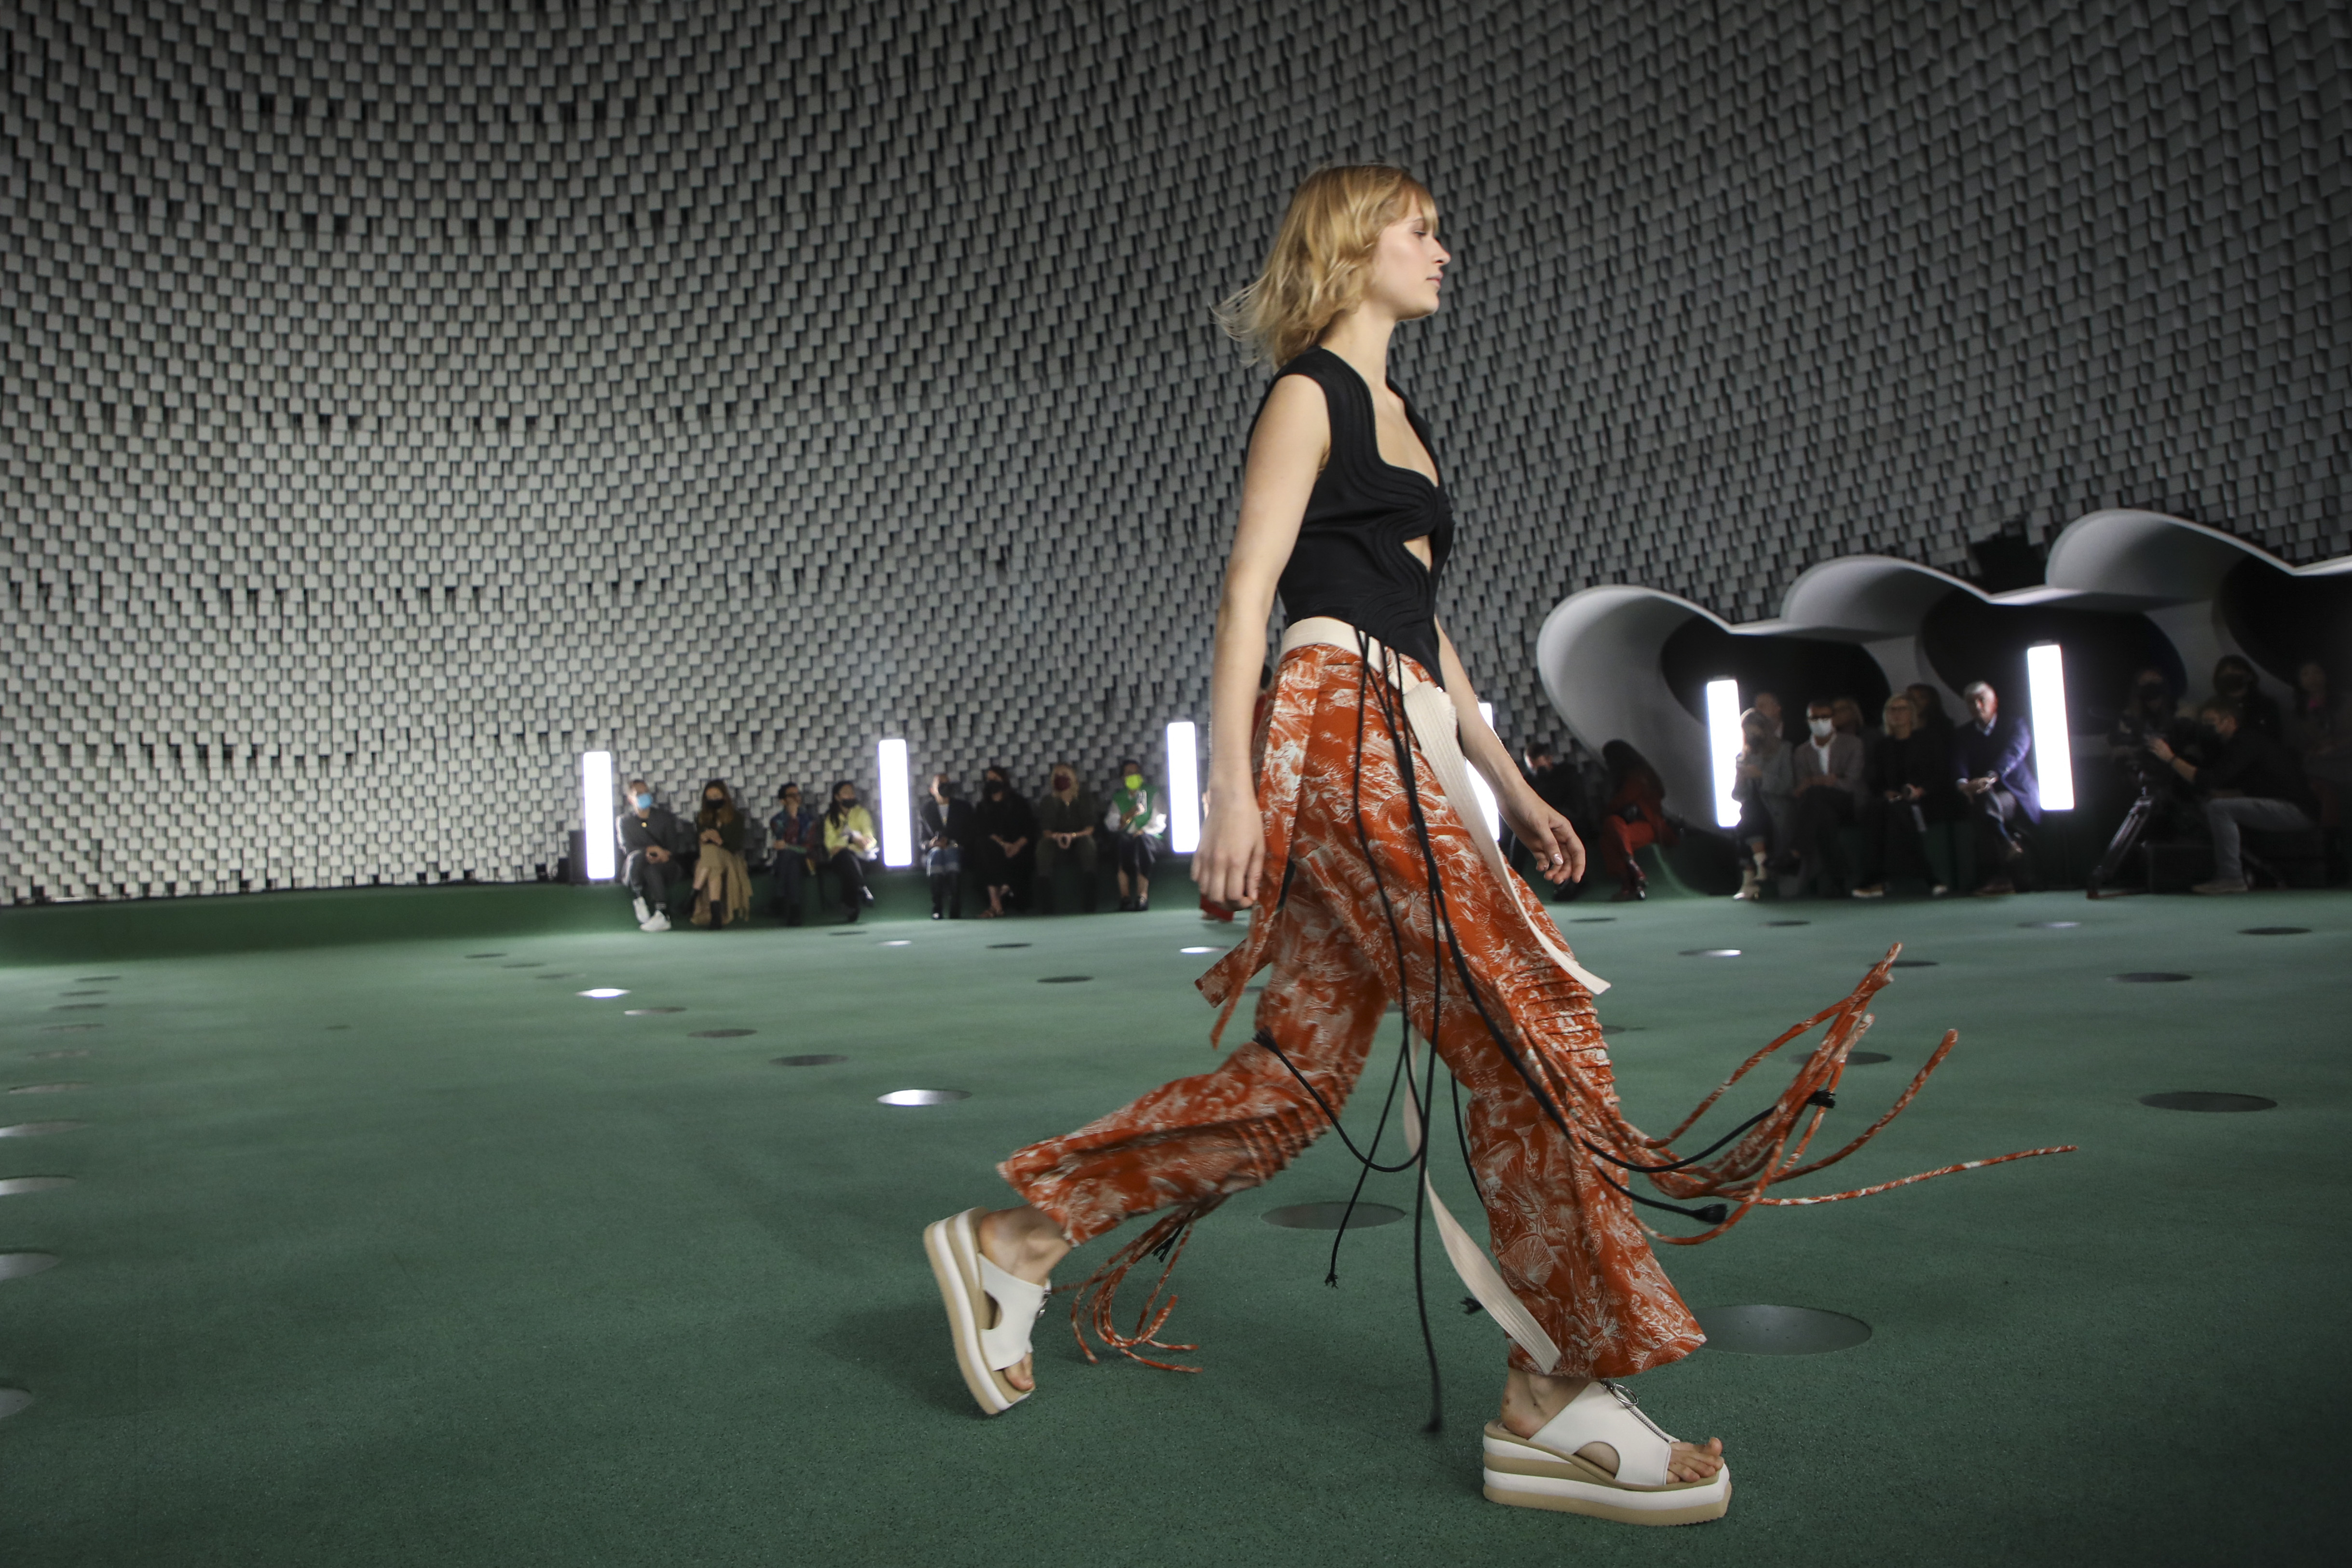 Stella McCartney revives greatest hits with 'nature-positive' show